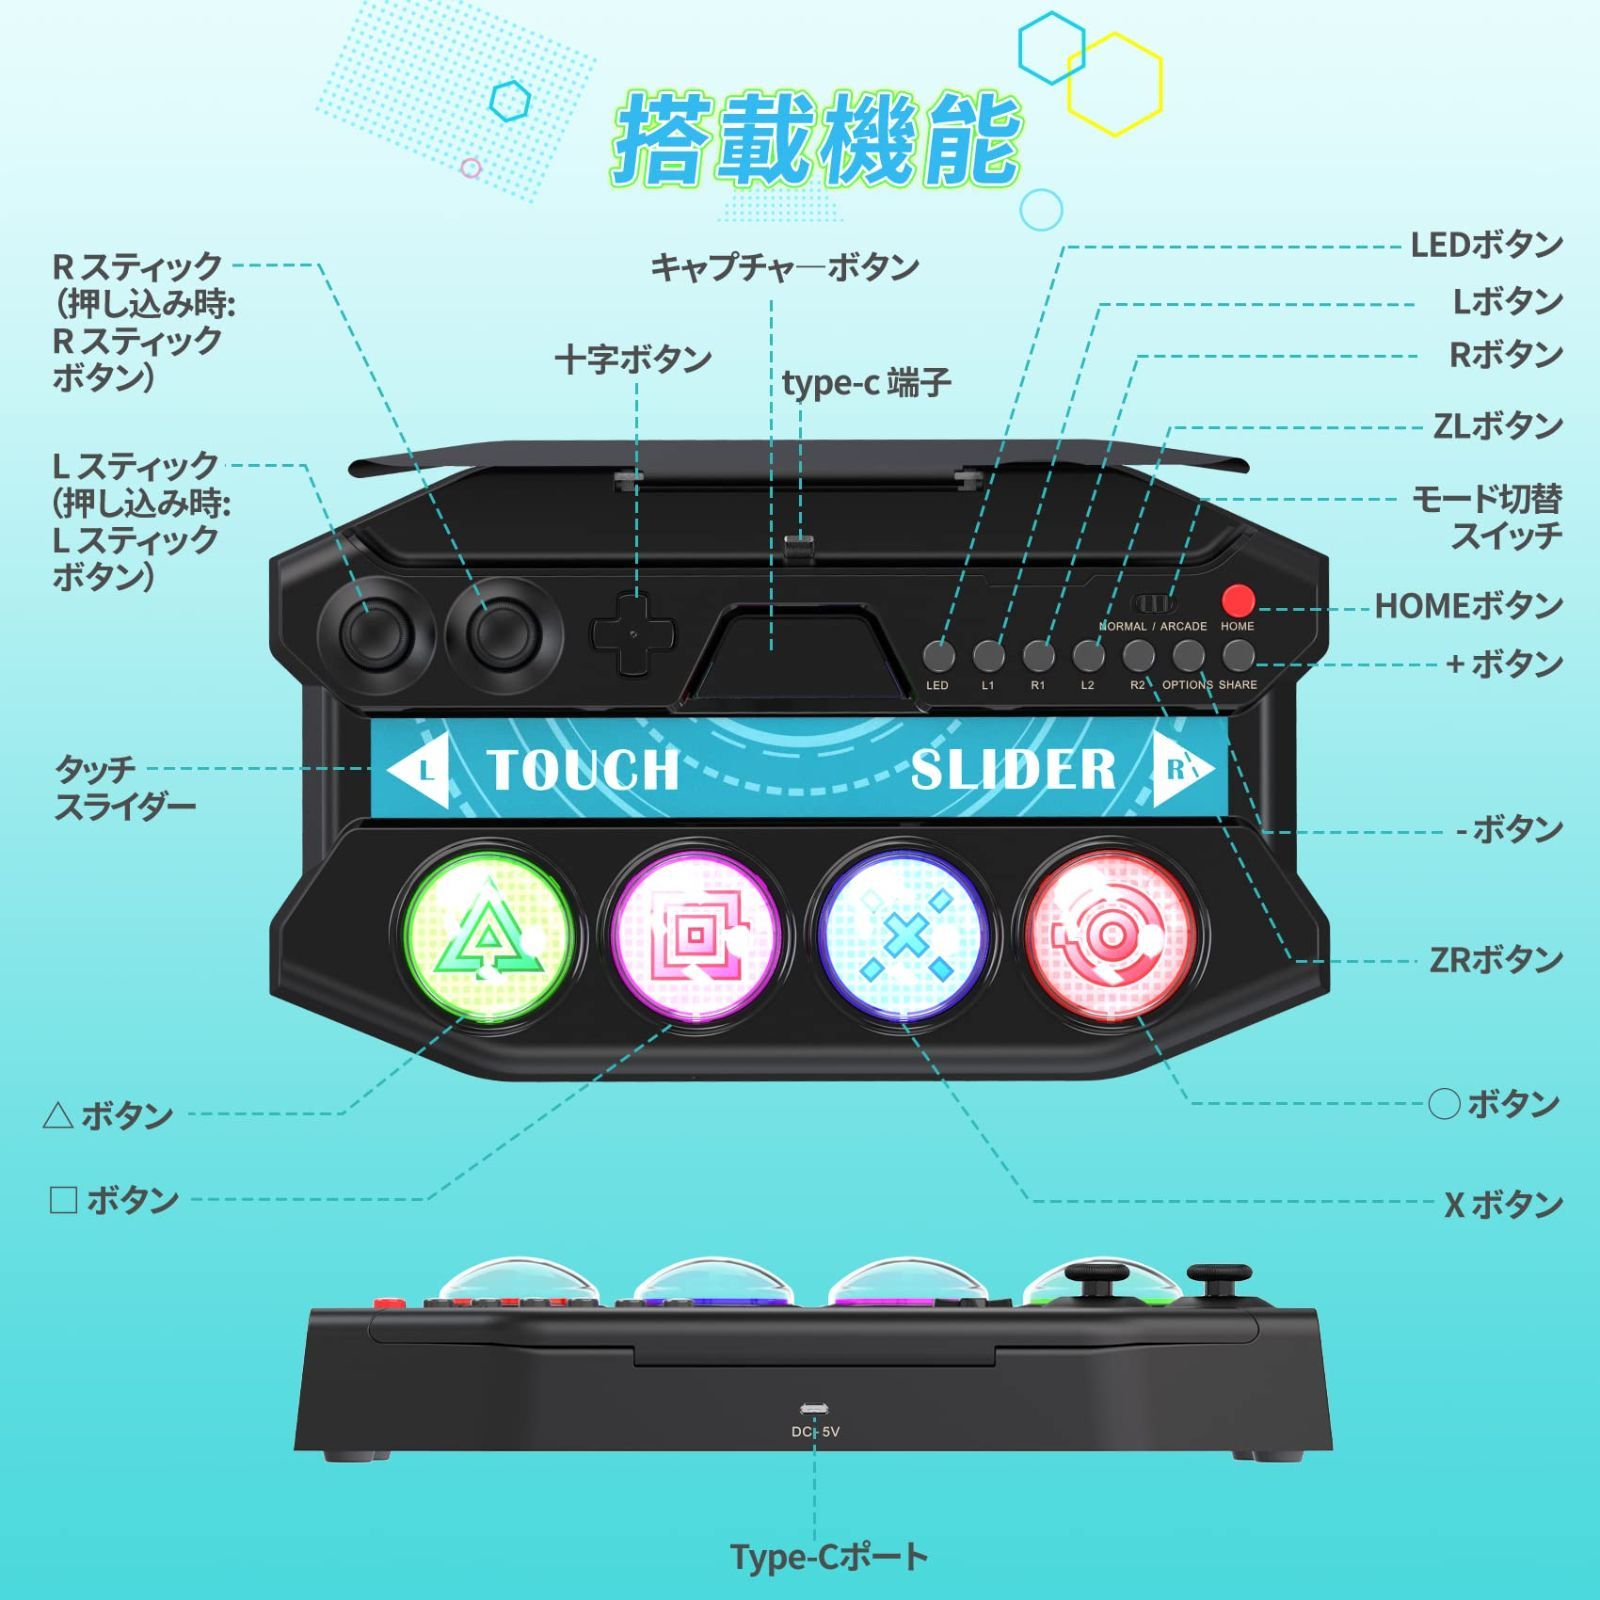 Tone DX 」専用ミニコントローラー Future for PS4 PS4コントローラー 